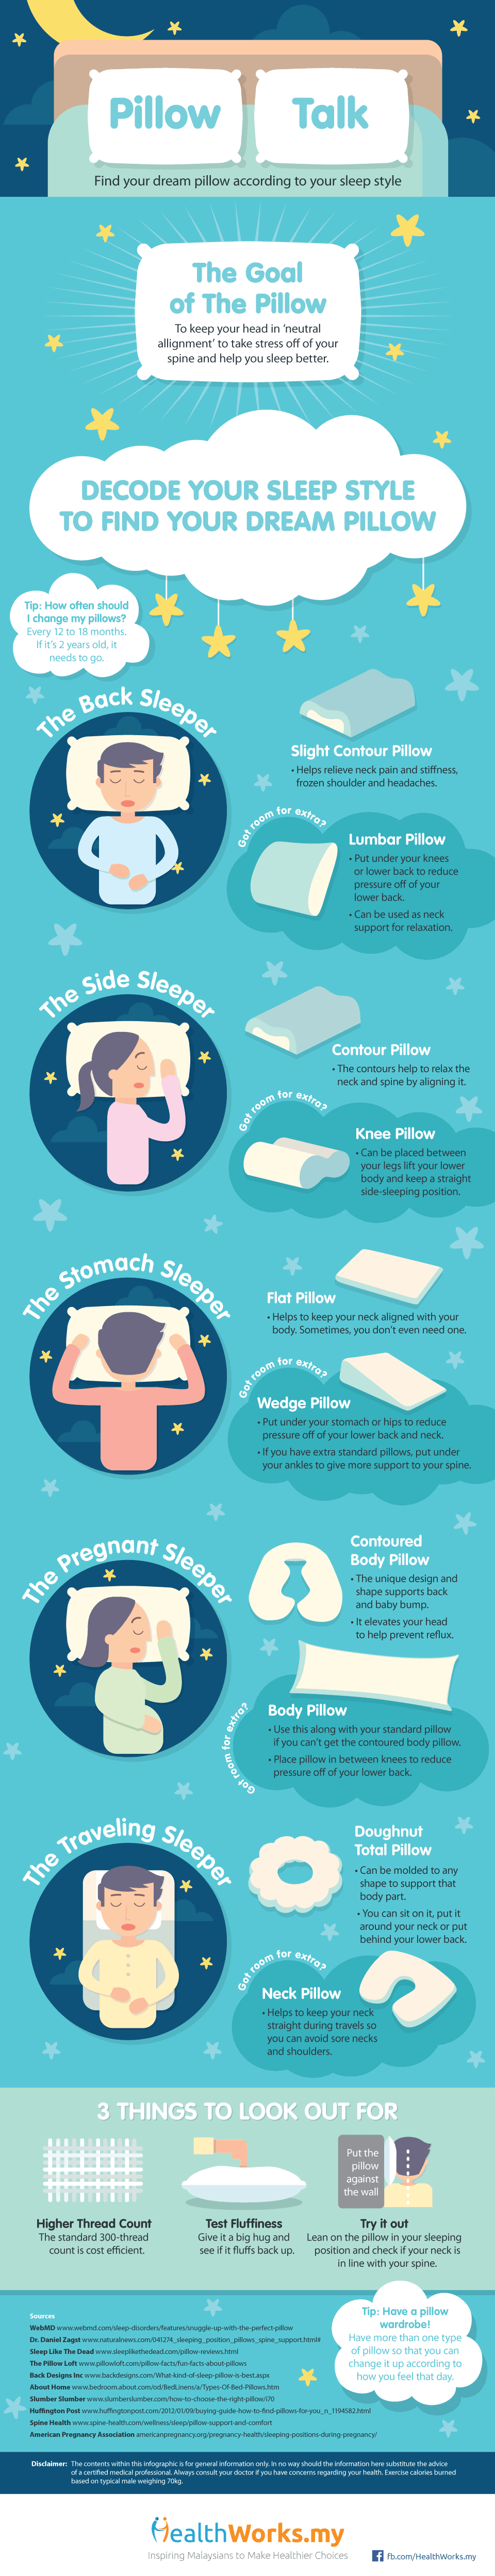 How to find the best pillow - infographics